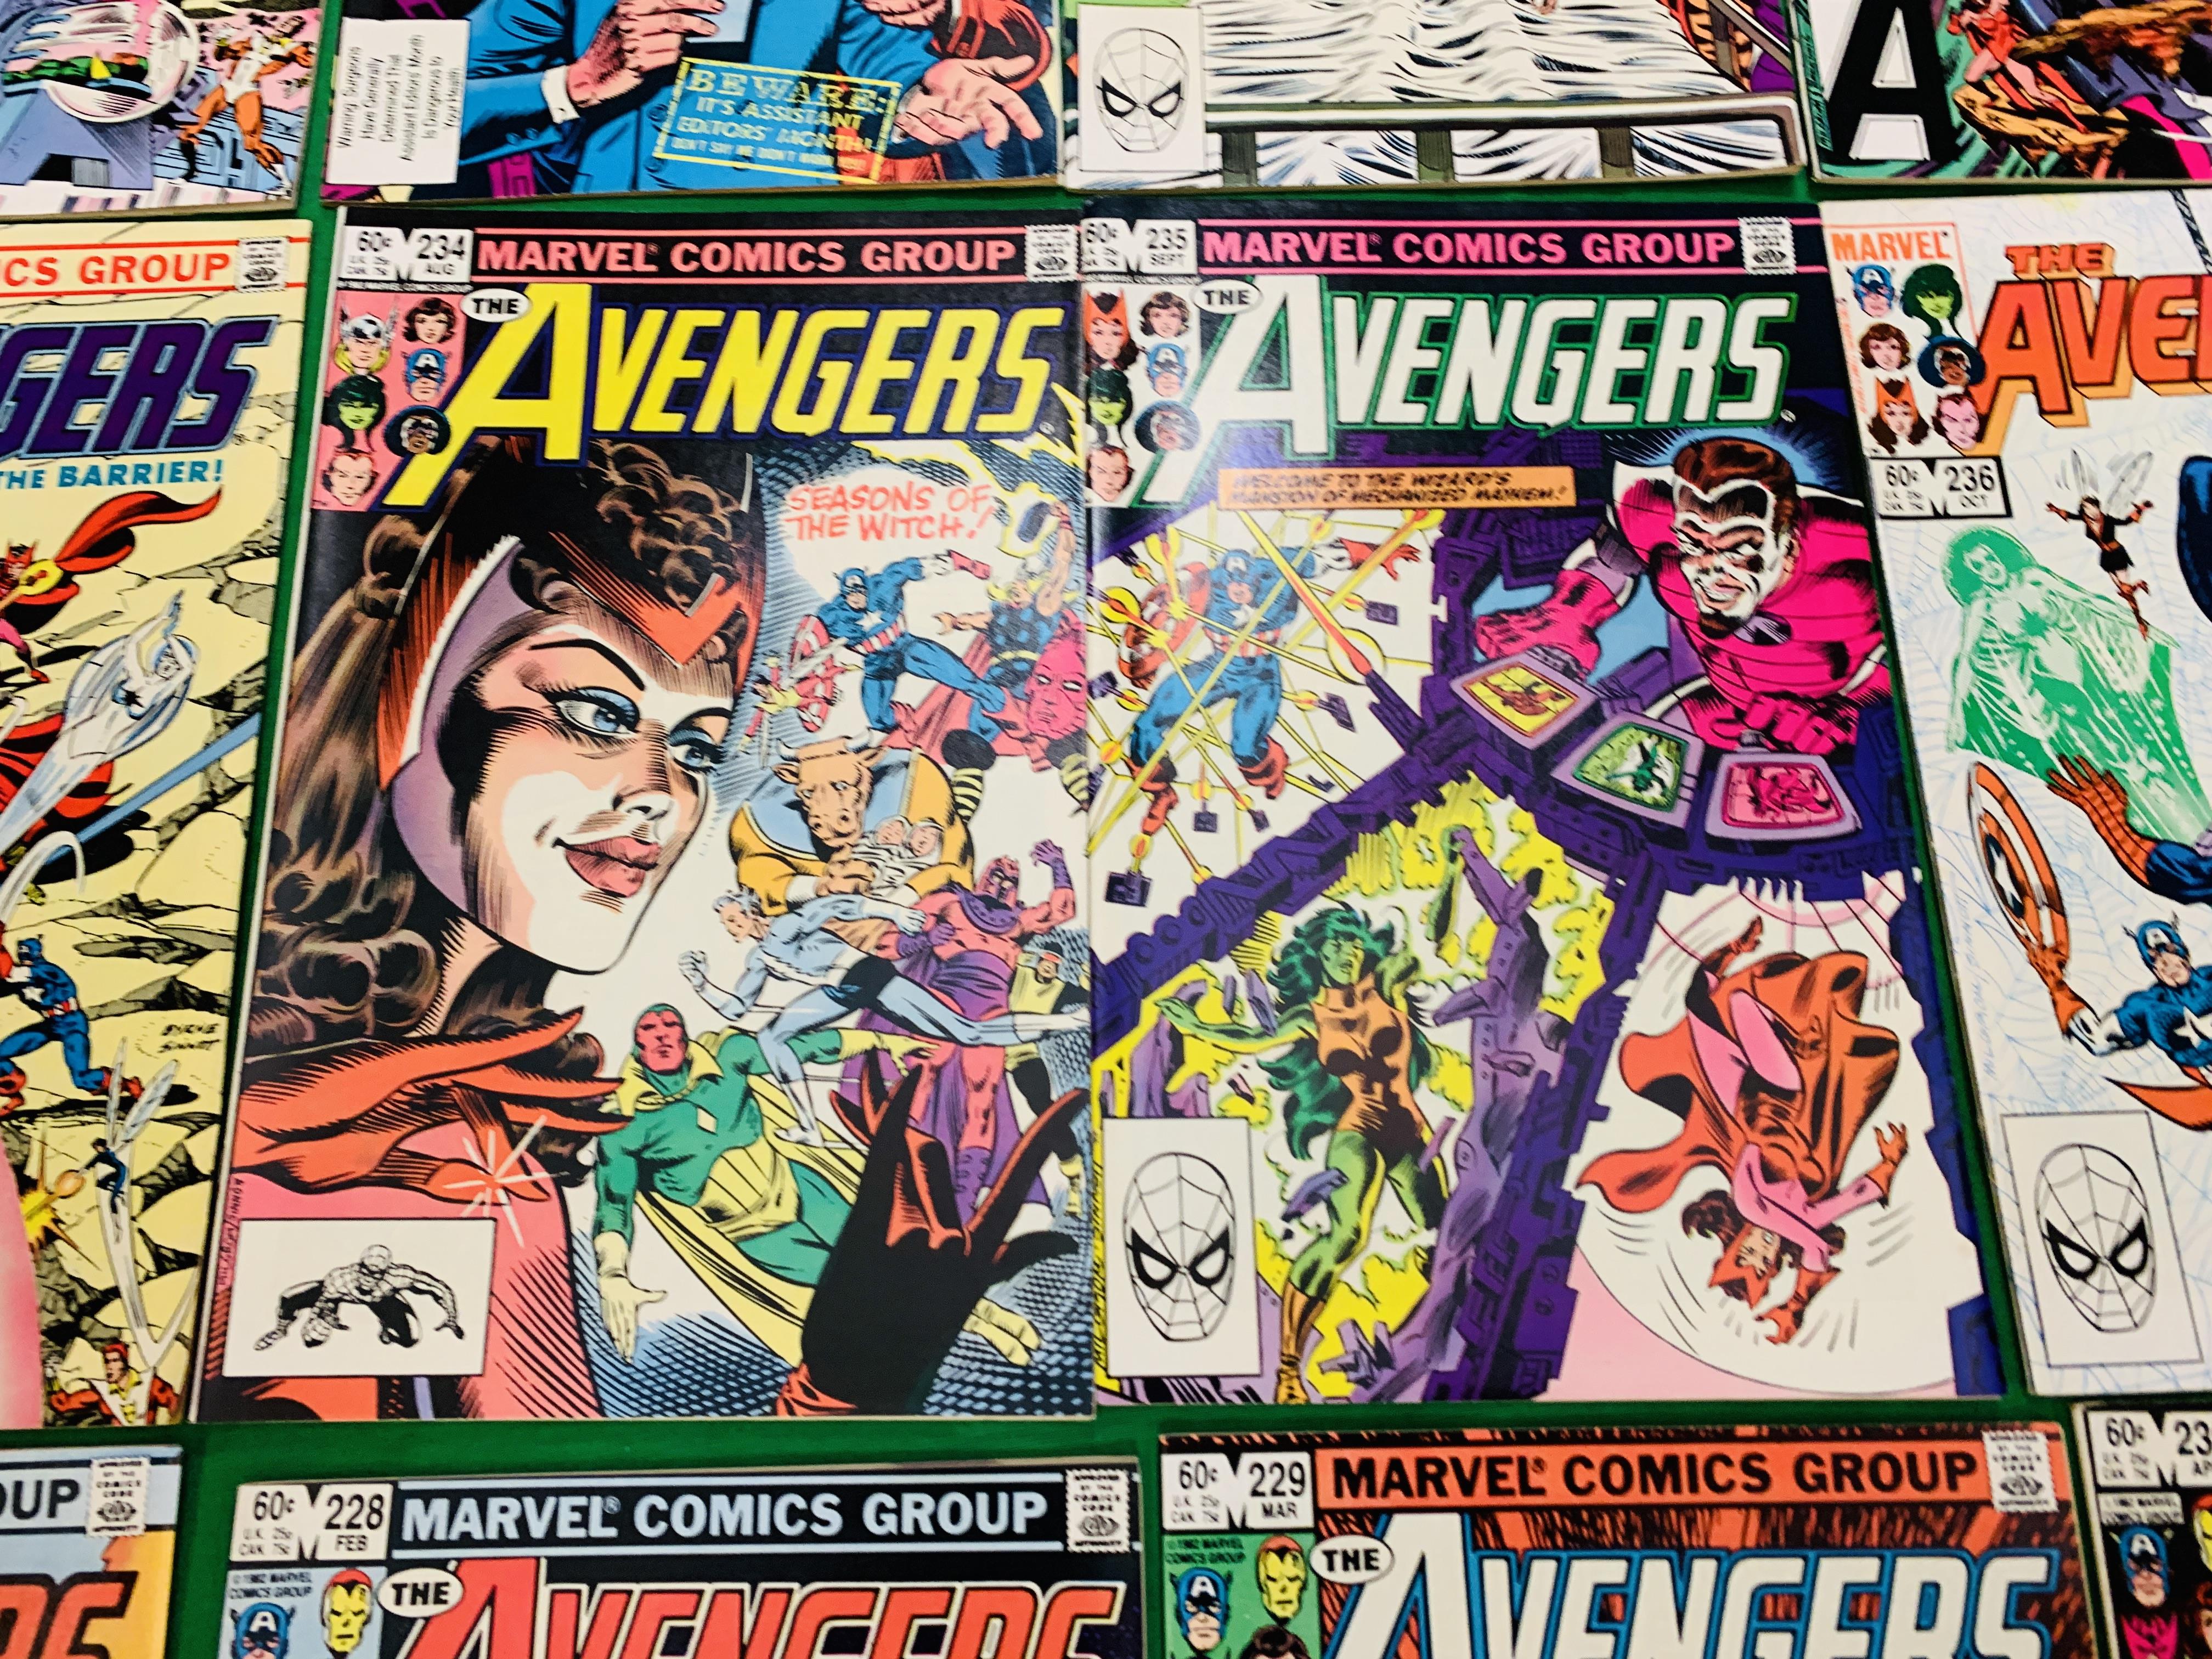 MARVEL COMICS THE AVENGERS NO. 101 - 299, MISSING ISSUES 103 AND 110. - Image 94 of 130